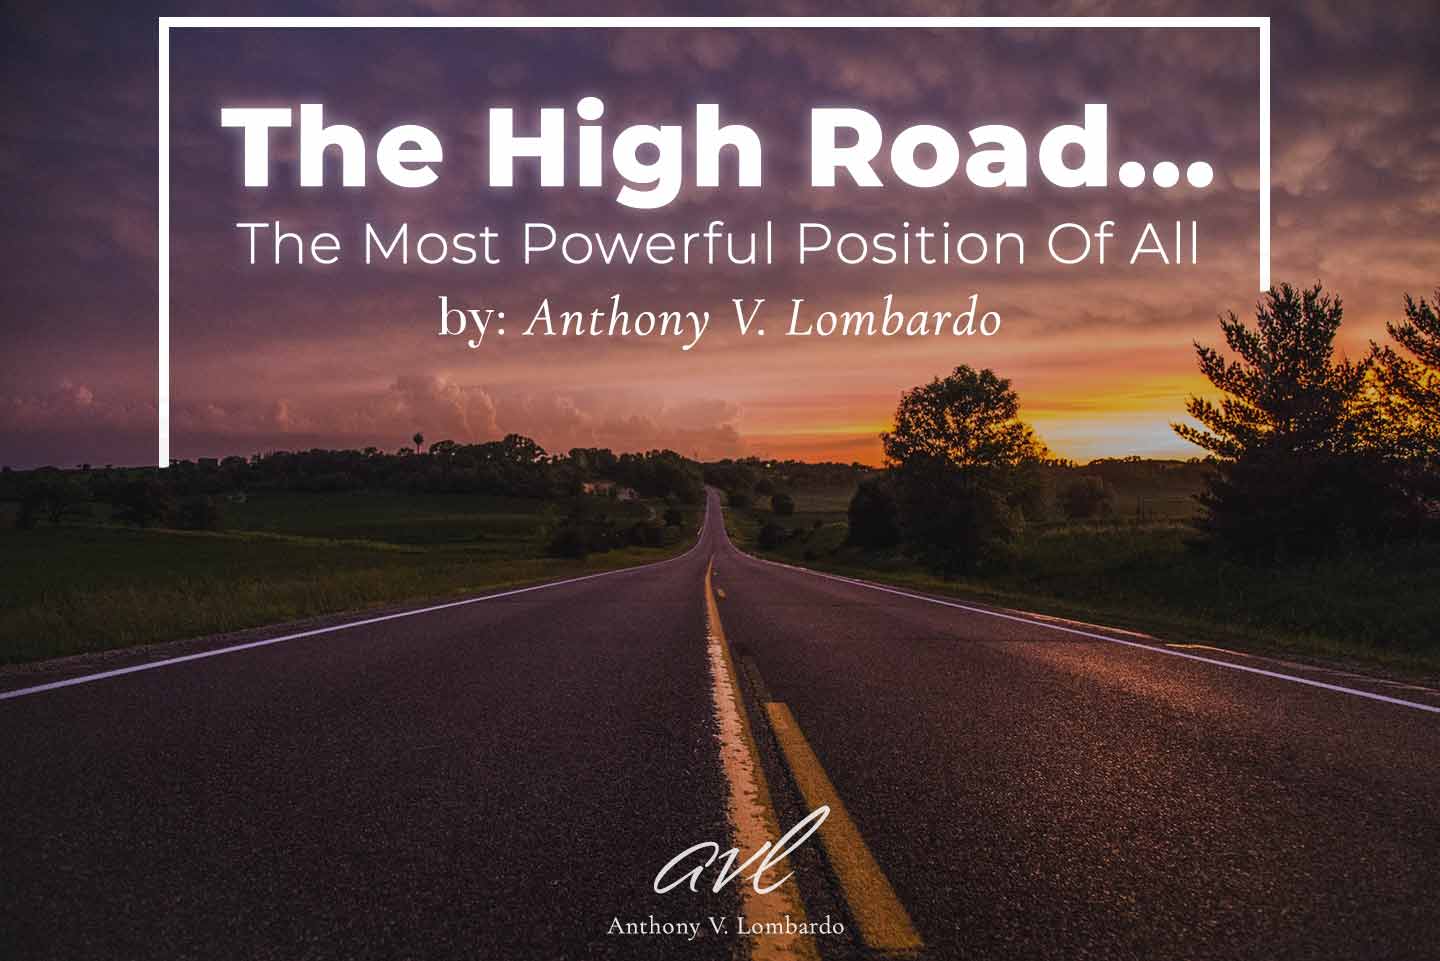 the high road is The Most Powerful Position Of All